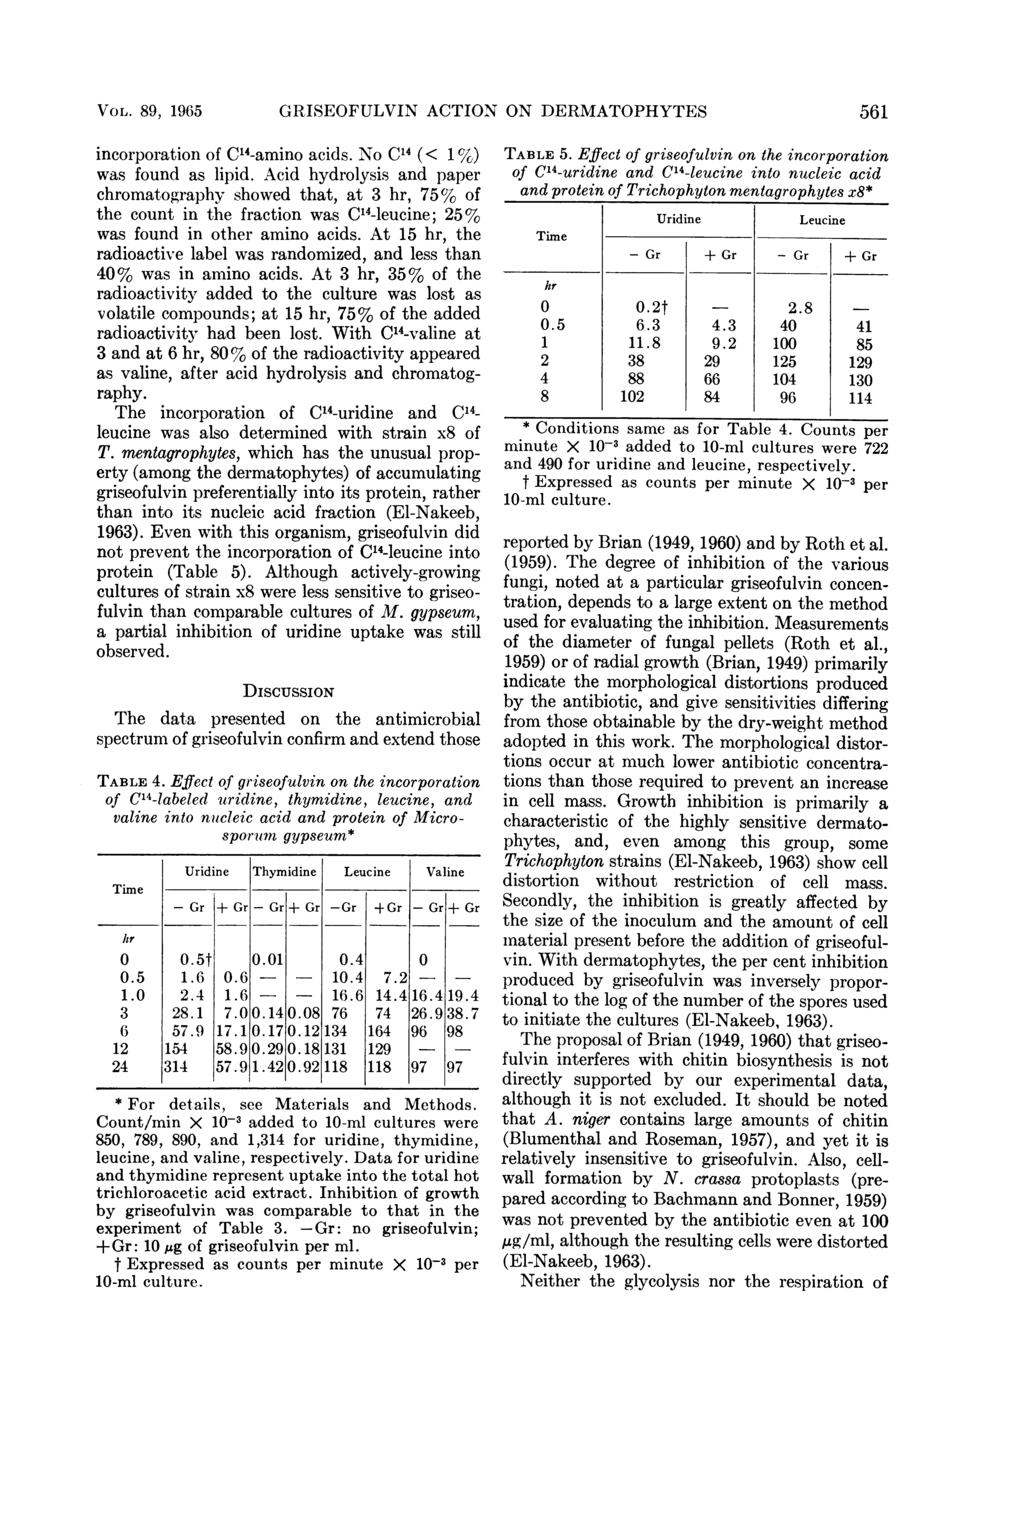 VOL. 89, 1965 GRISEOFULVIN ACTION ON DERMATOPHYTES 561 incorporation of C@4-amino acids. No C'4 (< 1 %) was found as lipid.